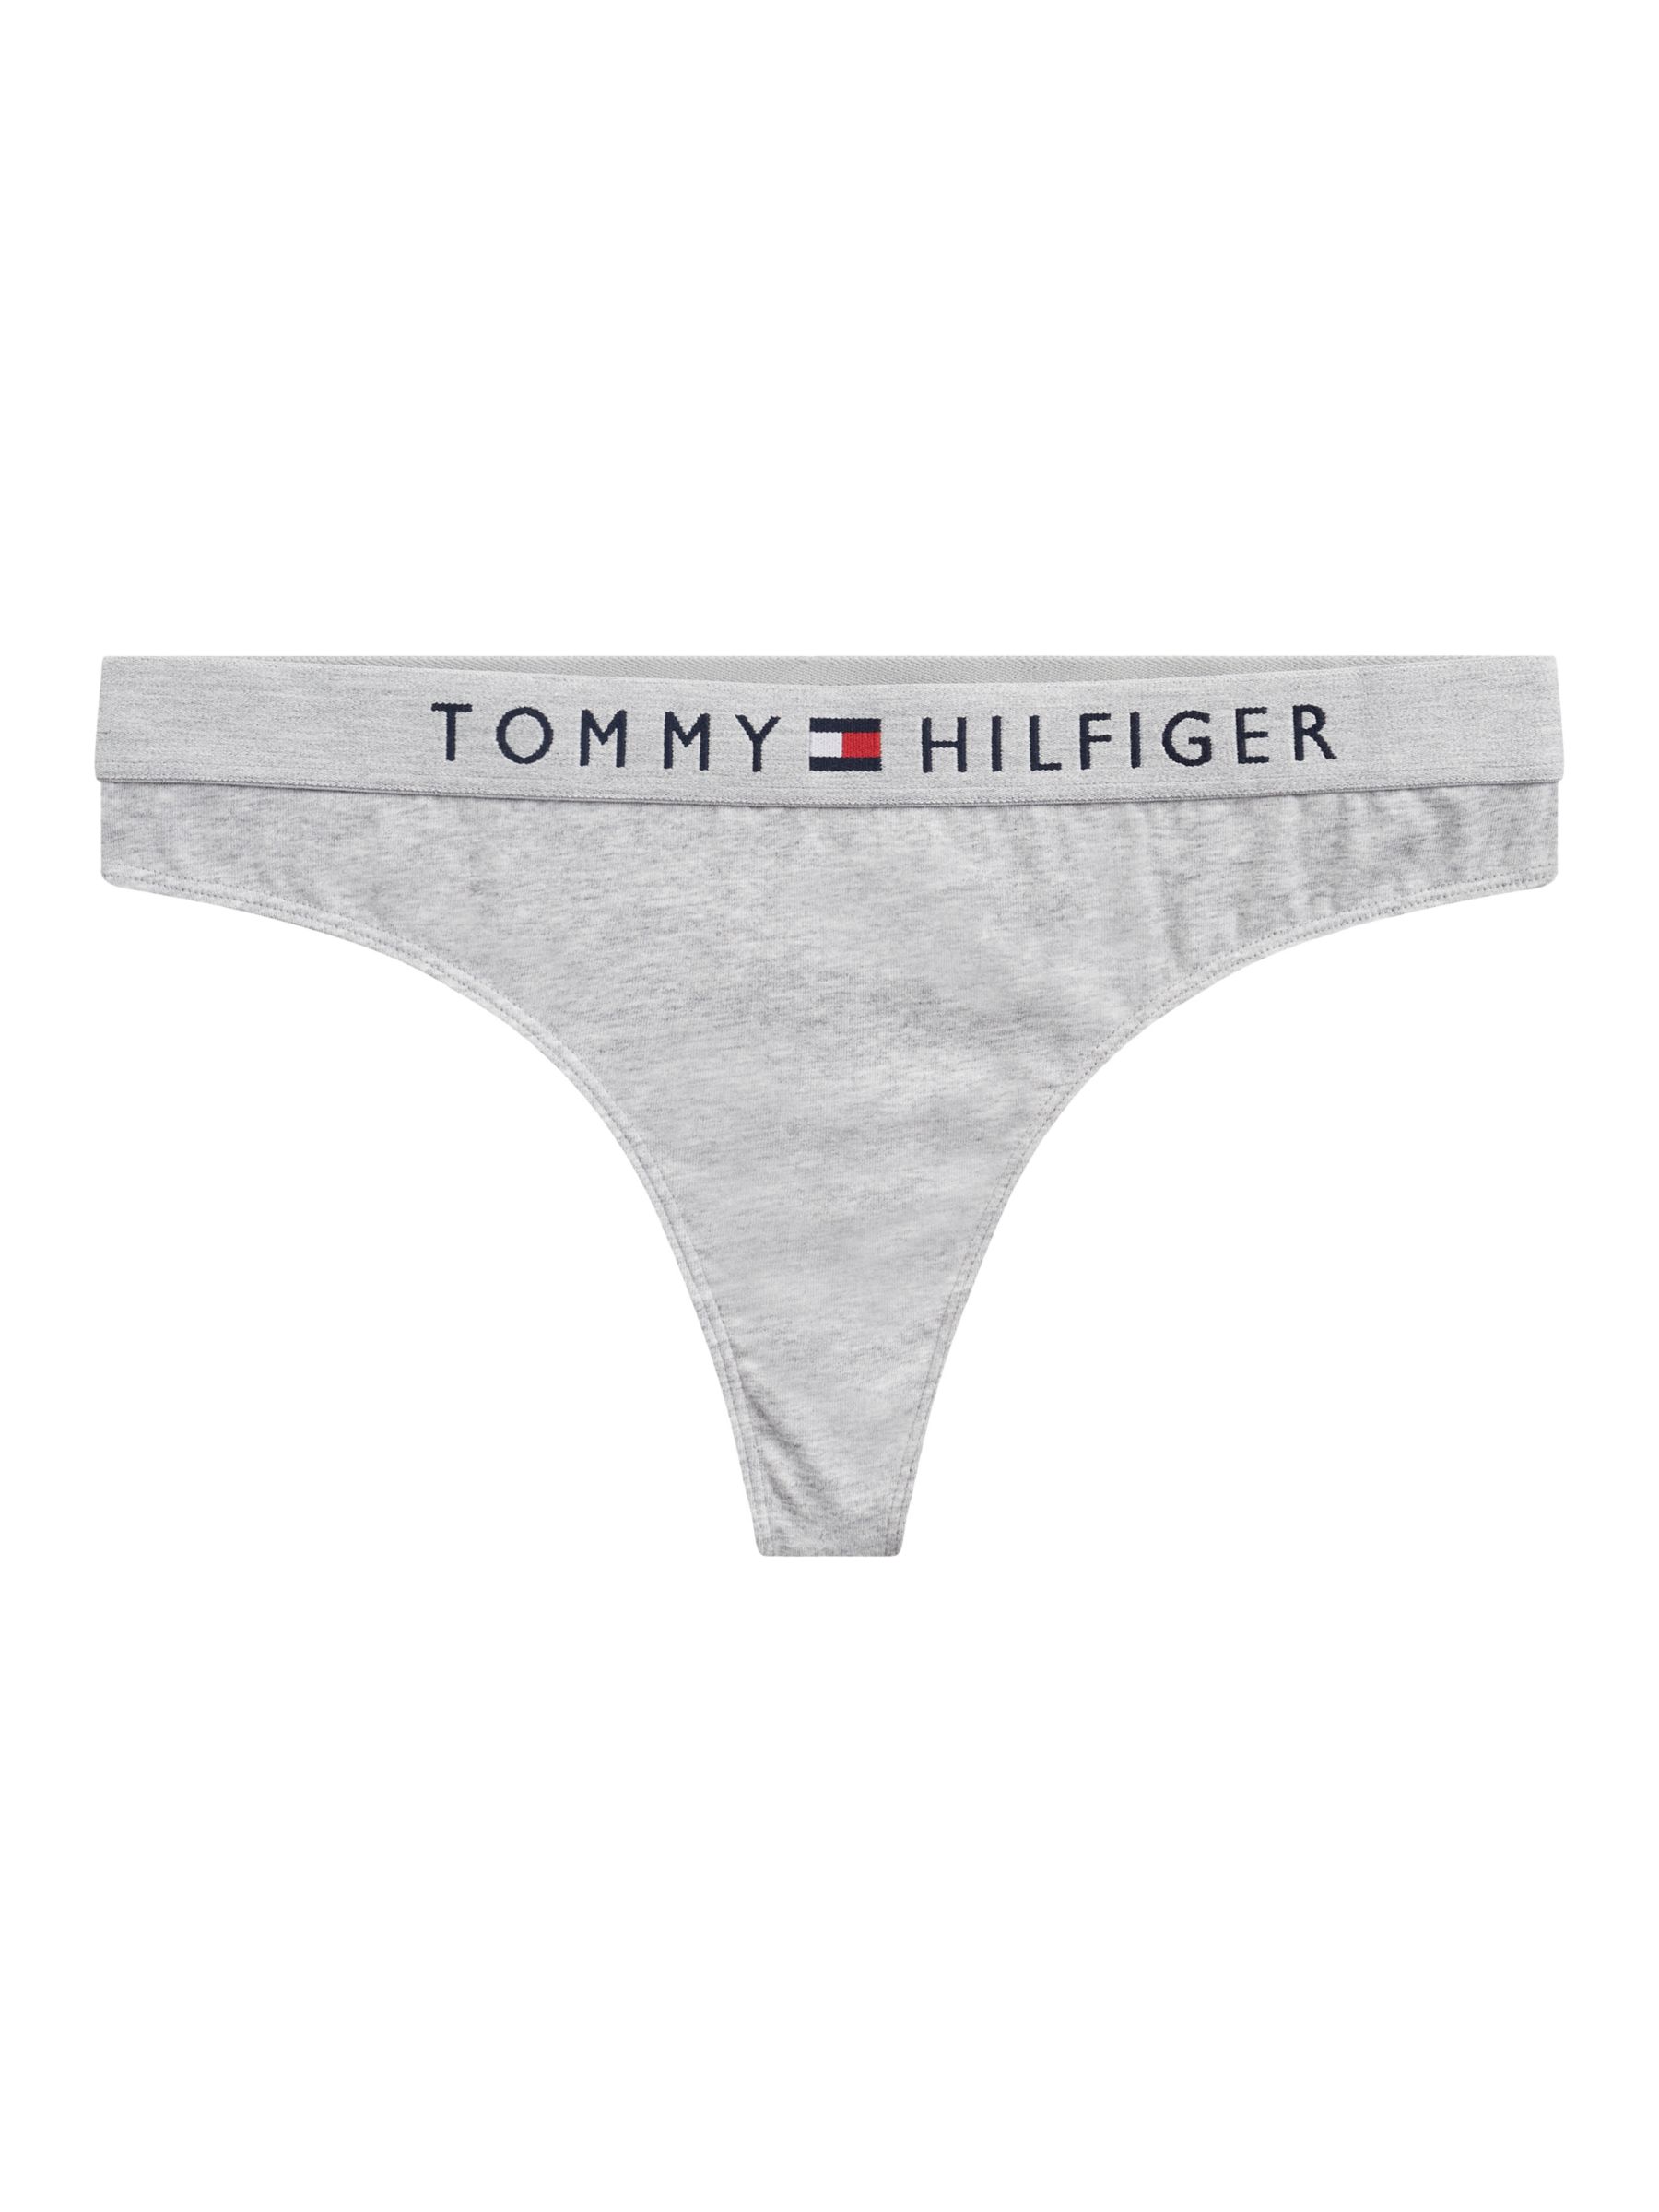 Tommy Hilfiger Stretch Thong, Grey Heather at John Lewis Partners